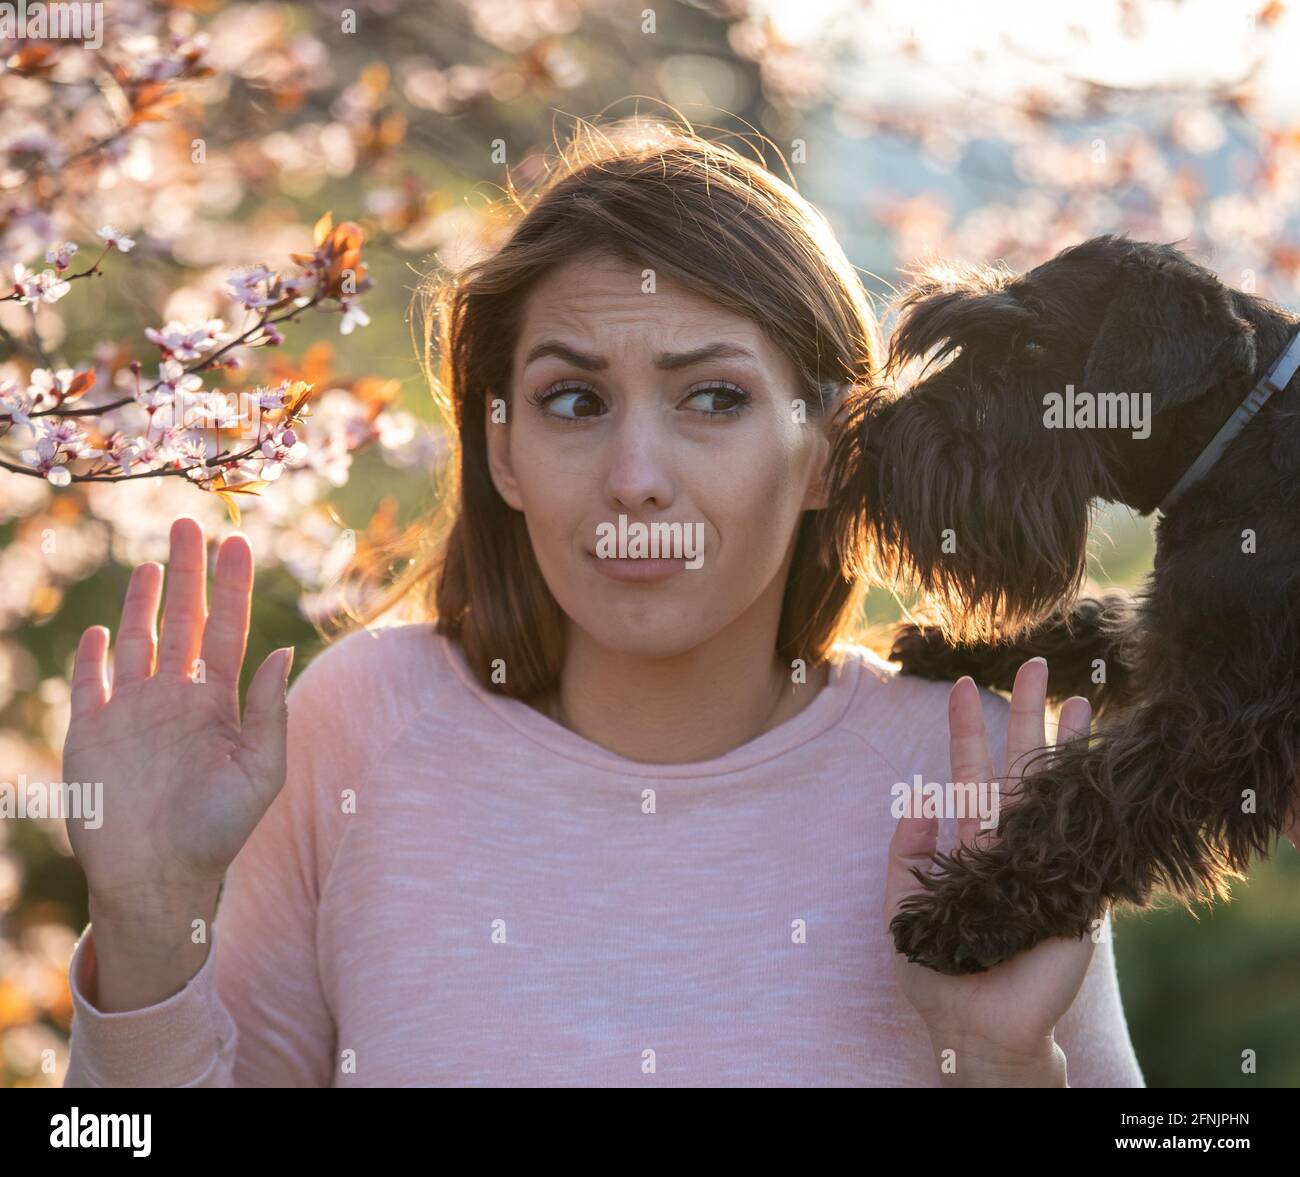 Afraid girl showing stop sign to dog and blooming tree because of allergic reaction to pollen and animal hair Stock Photo